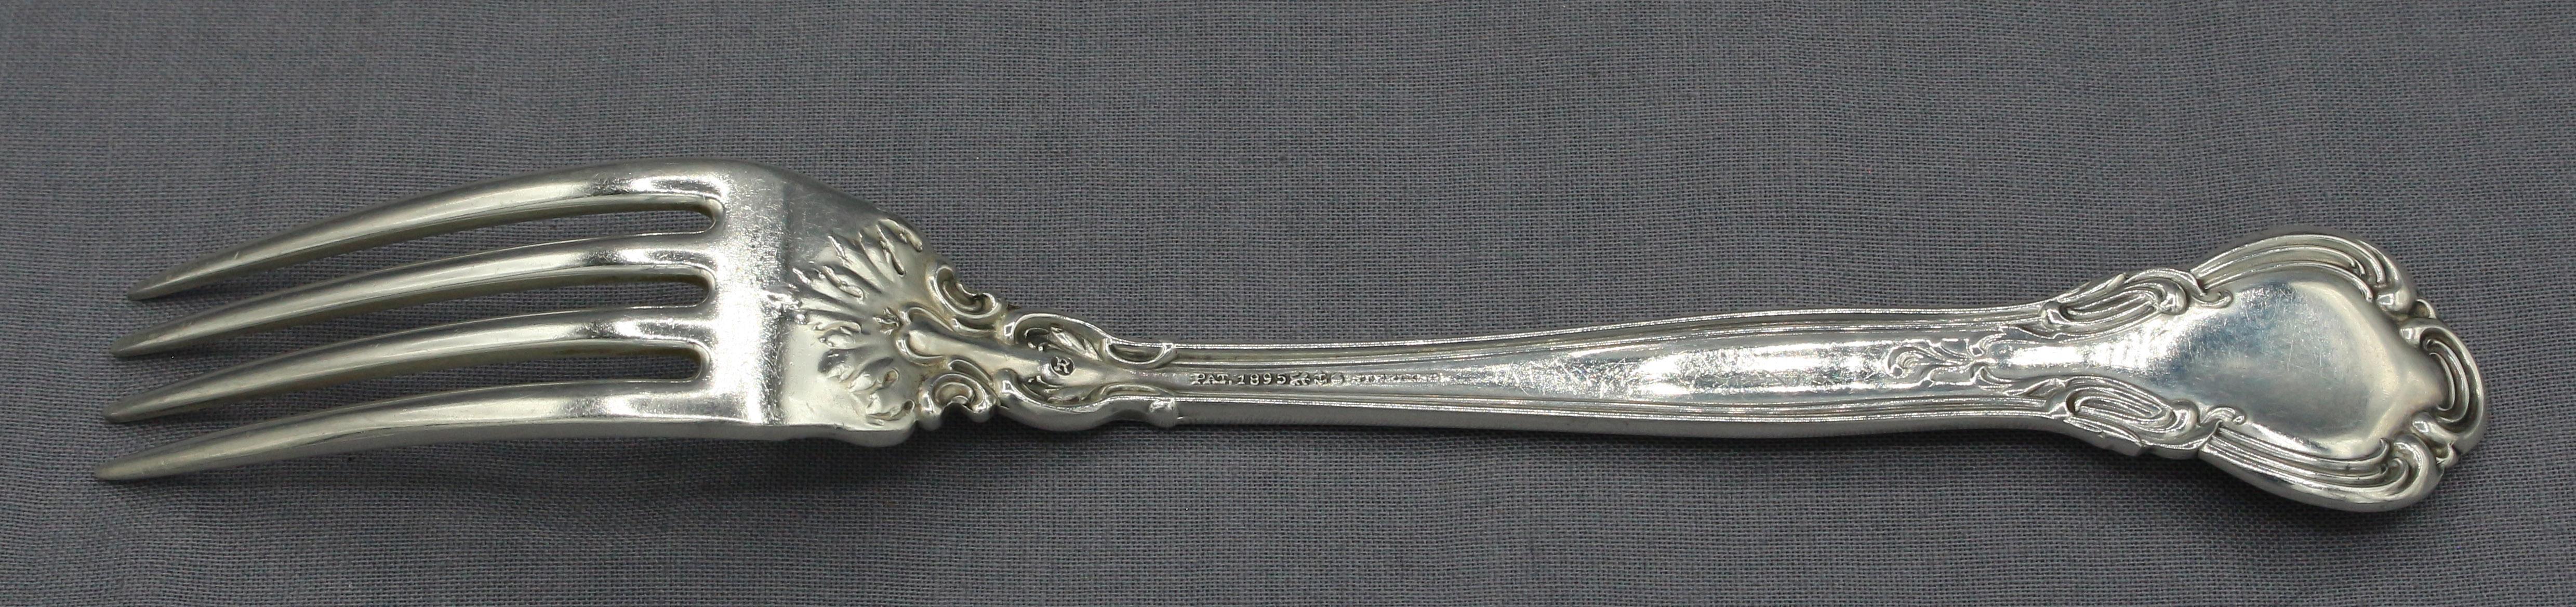 Rococo Late 19th Century Assembled Set of 7 Sterling Silver Luncheon Forks by Gorham For Sale